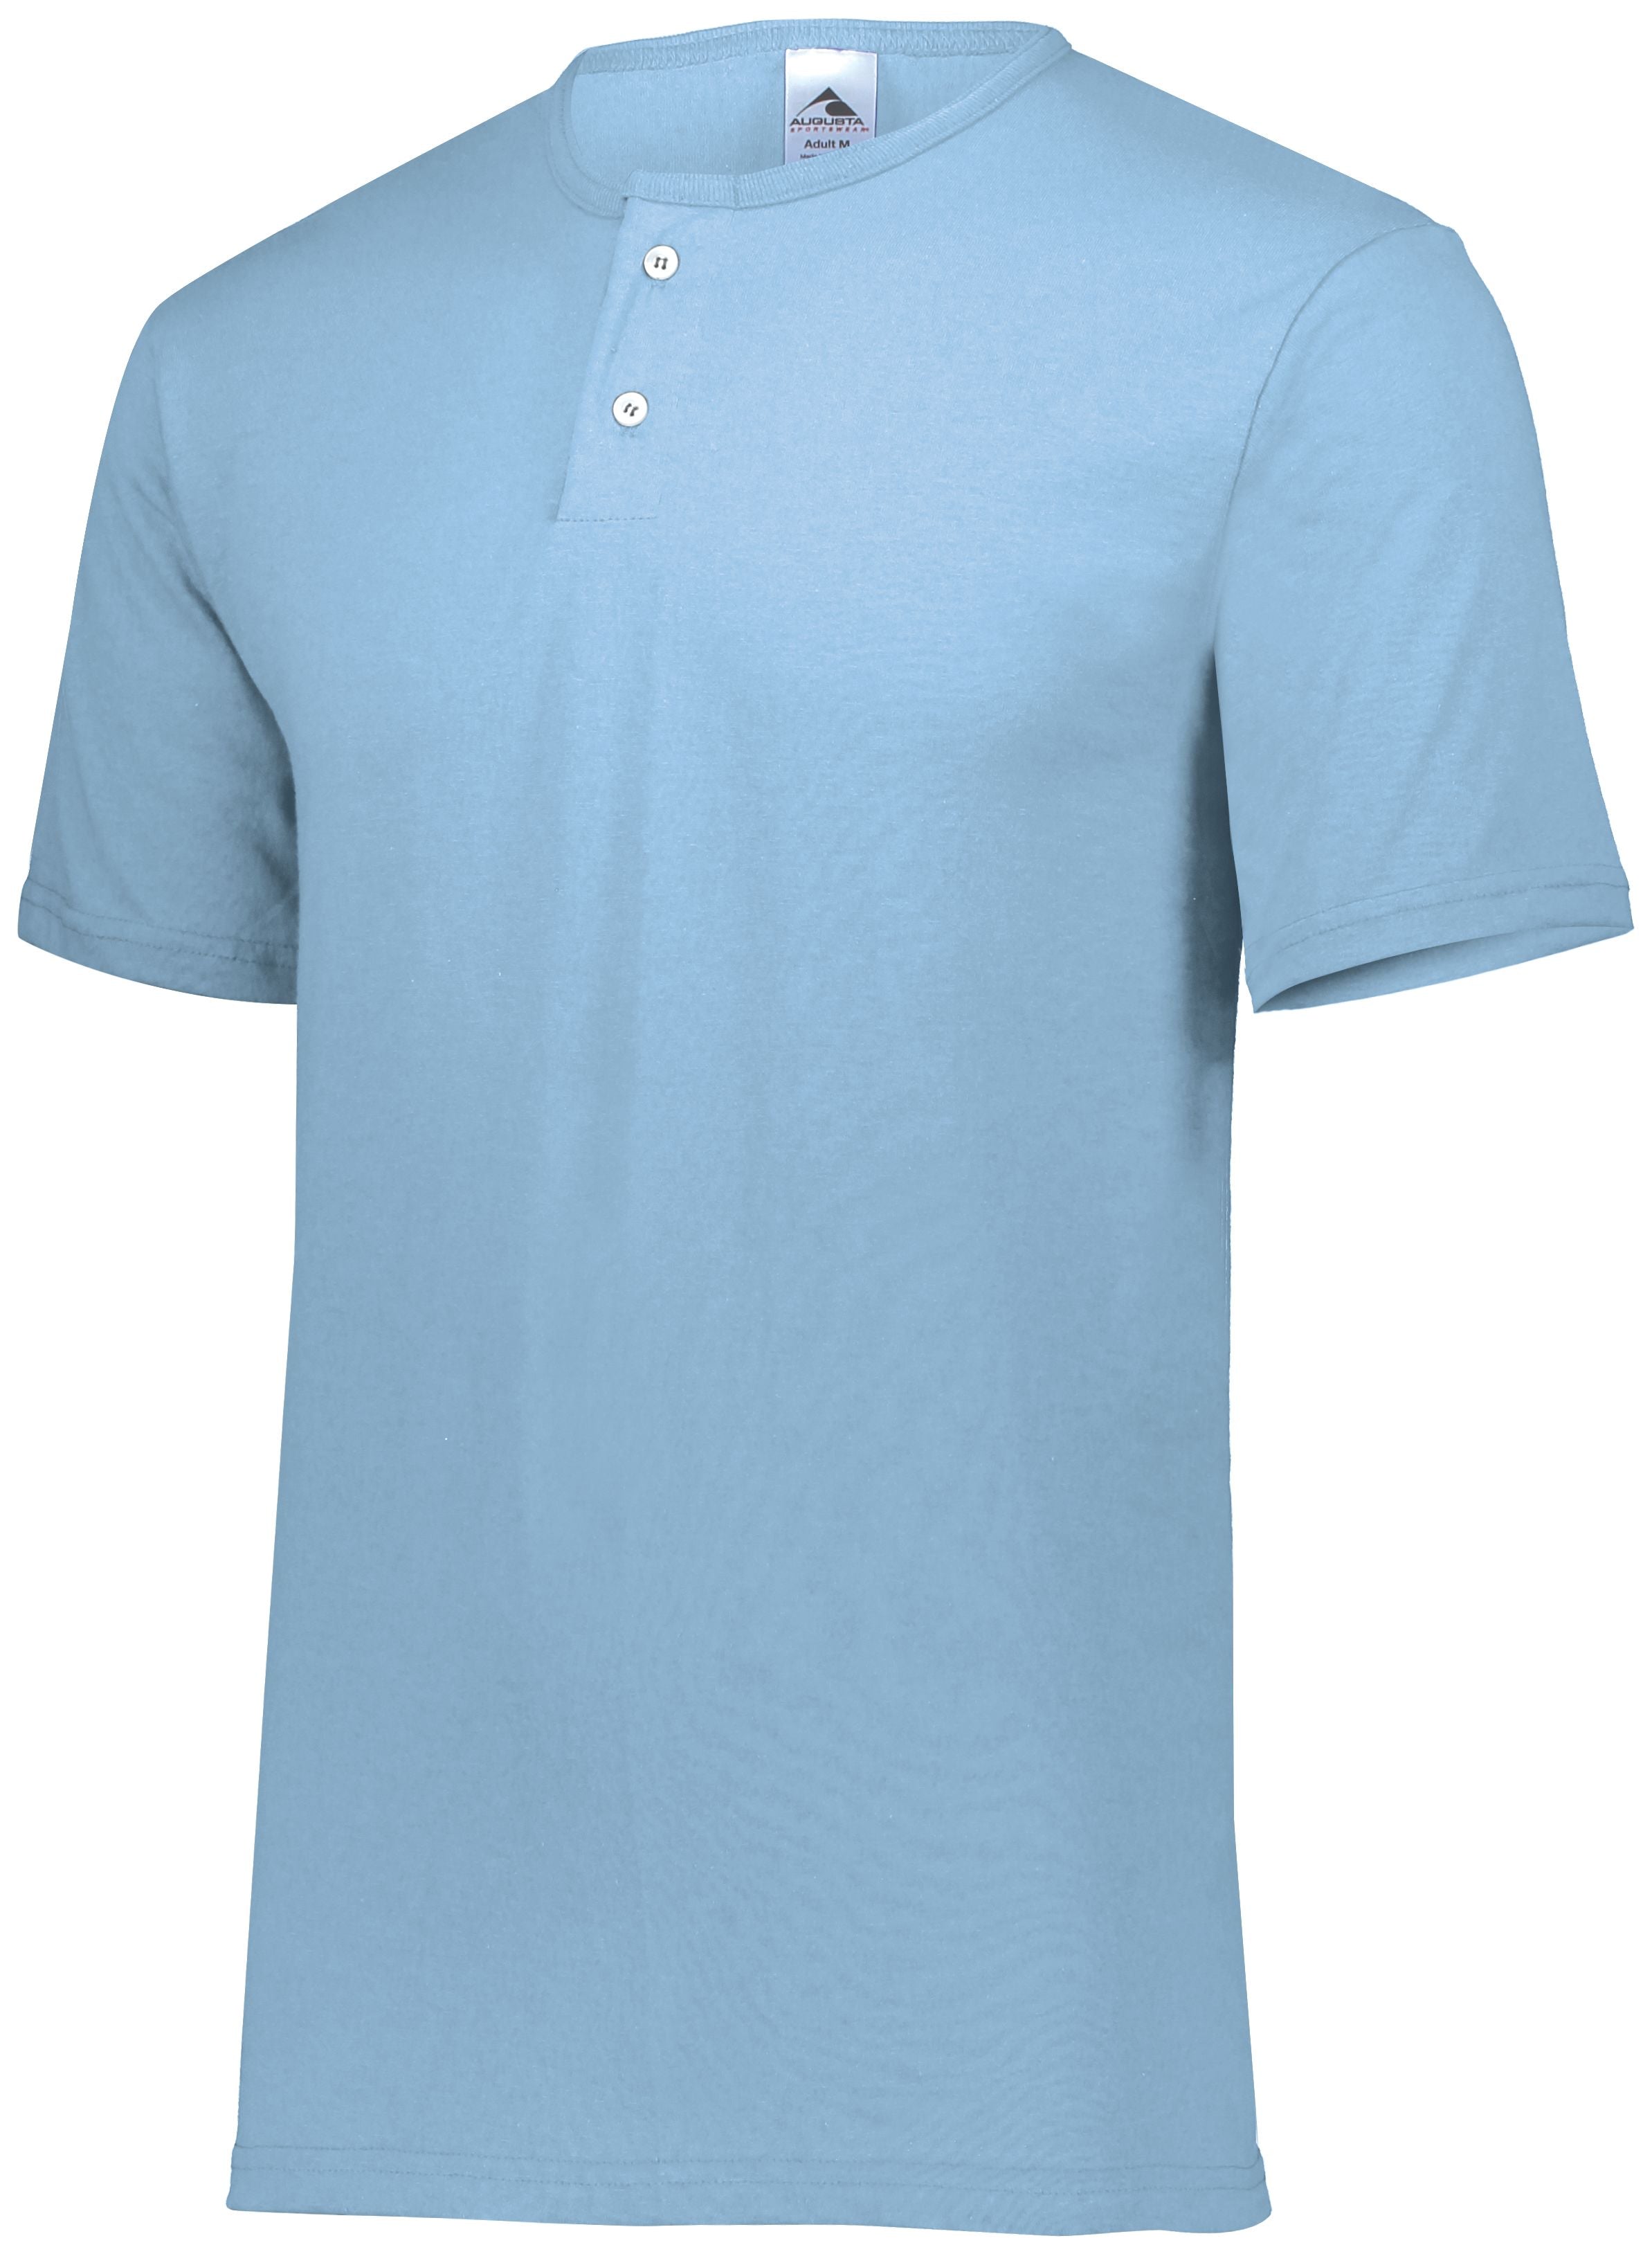 Augusta Sportswear Two-Button Baseball Jersey in Light Blue  -Part of the Adult, Adult-Jersey, Augusta-Products, Baseball, Shirts, All-Sports, All-Sports-1 product lines at KanaleyCreations.com